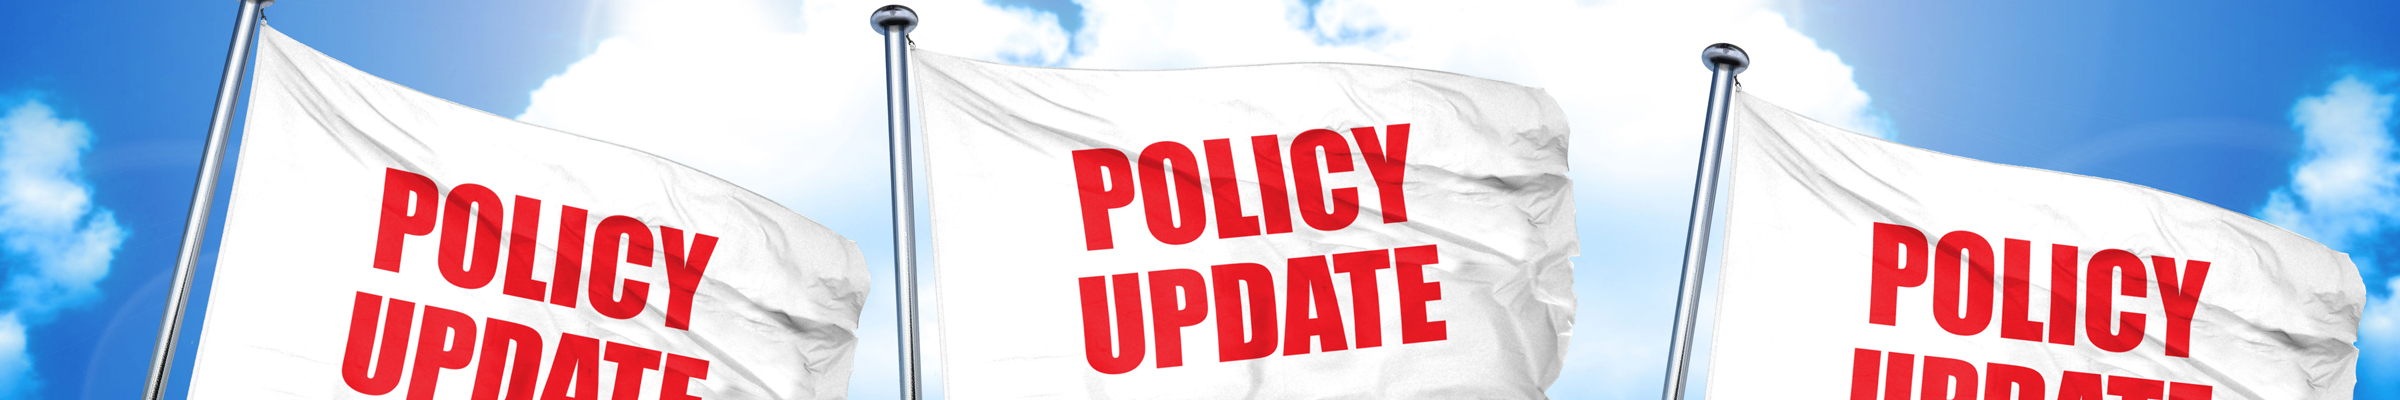 Flags waving in the sky with the words, "Policy Update" on them